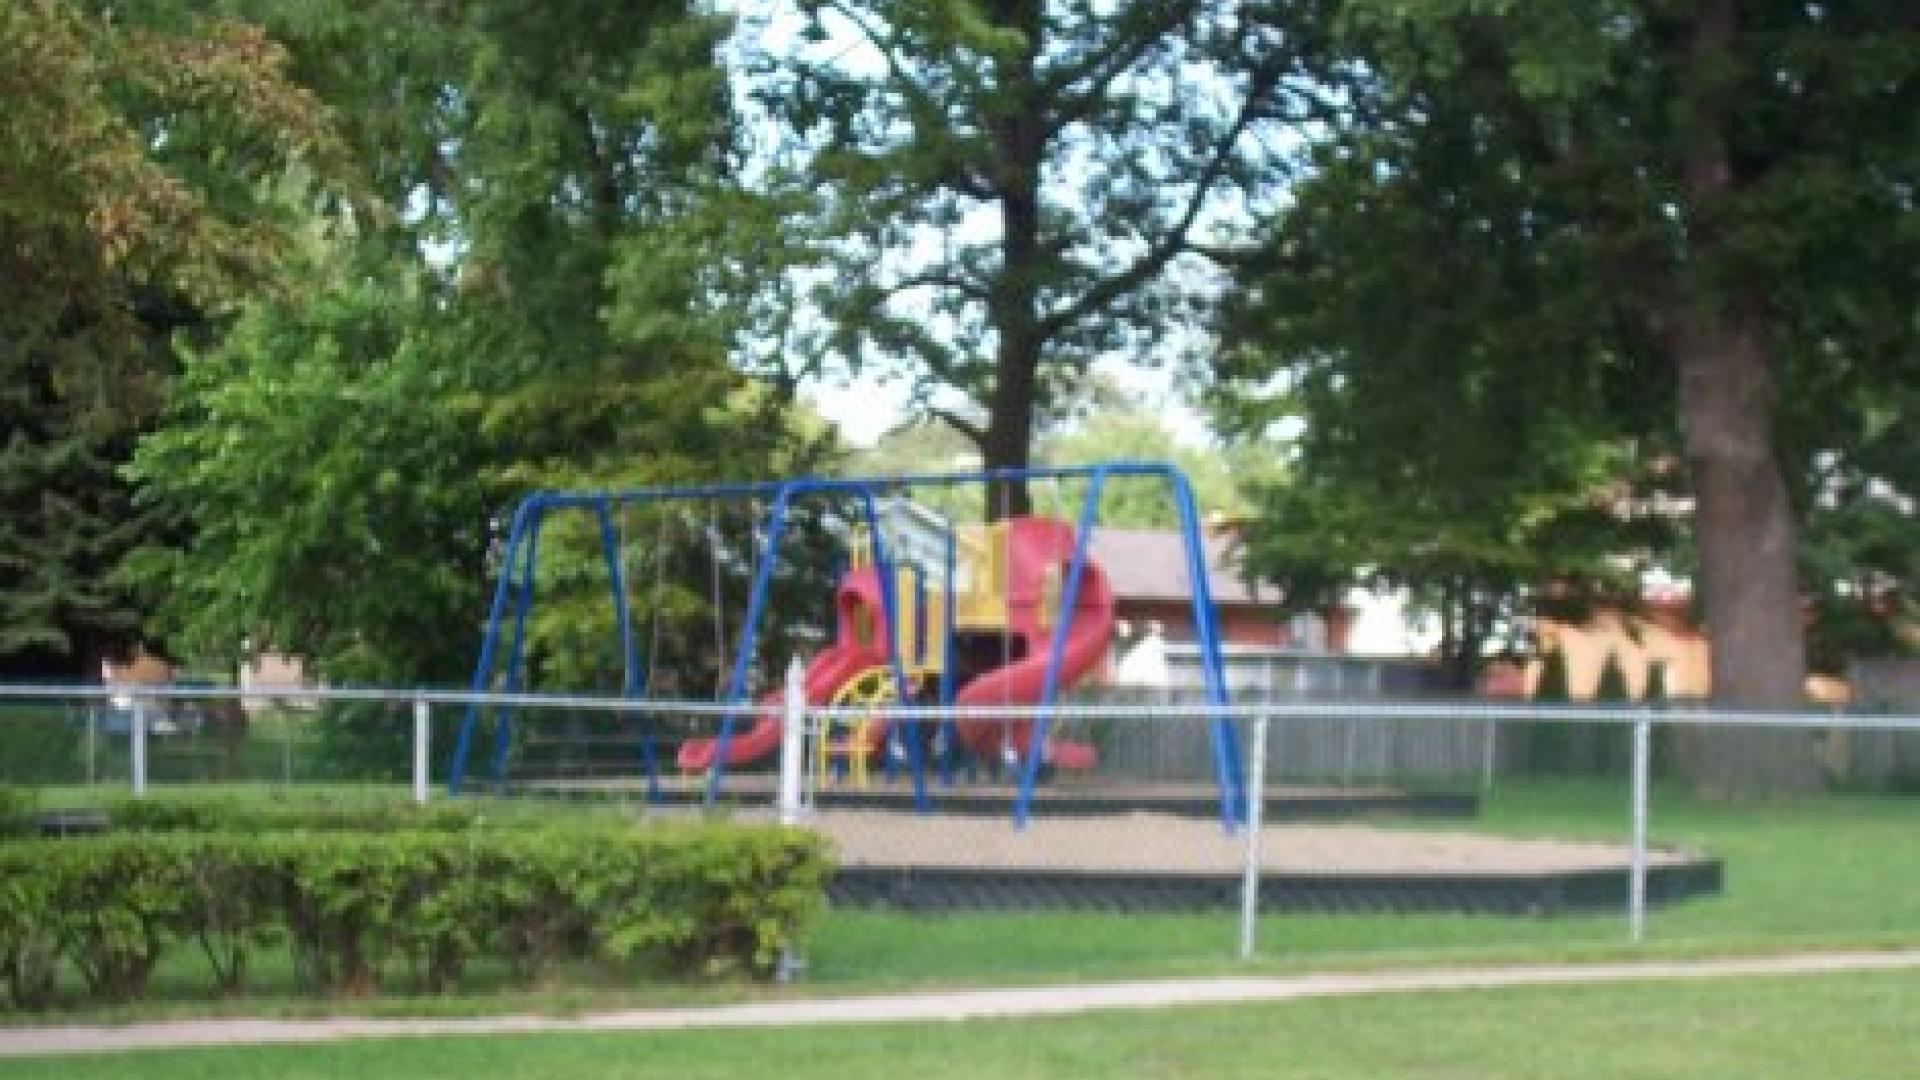 Playground with  a junglge gym and a swing set. There is a fence in the foreground and some trees in the background..